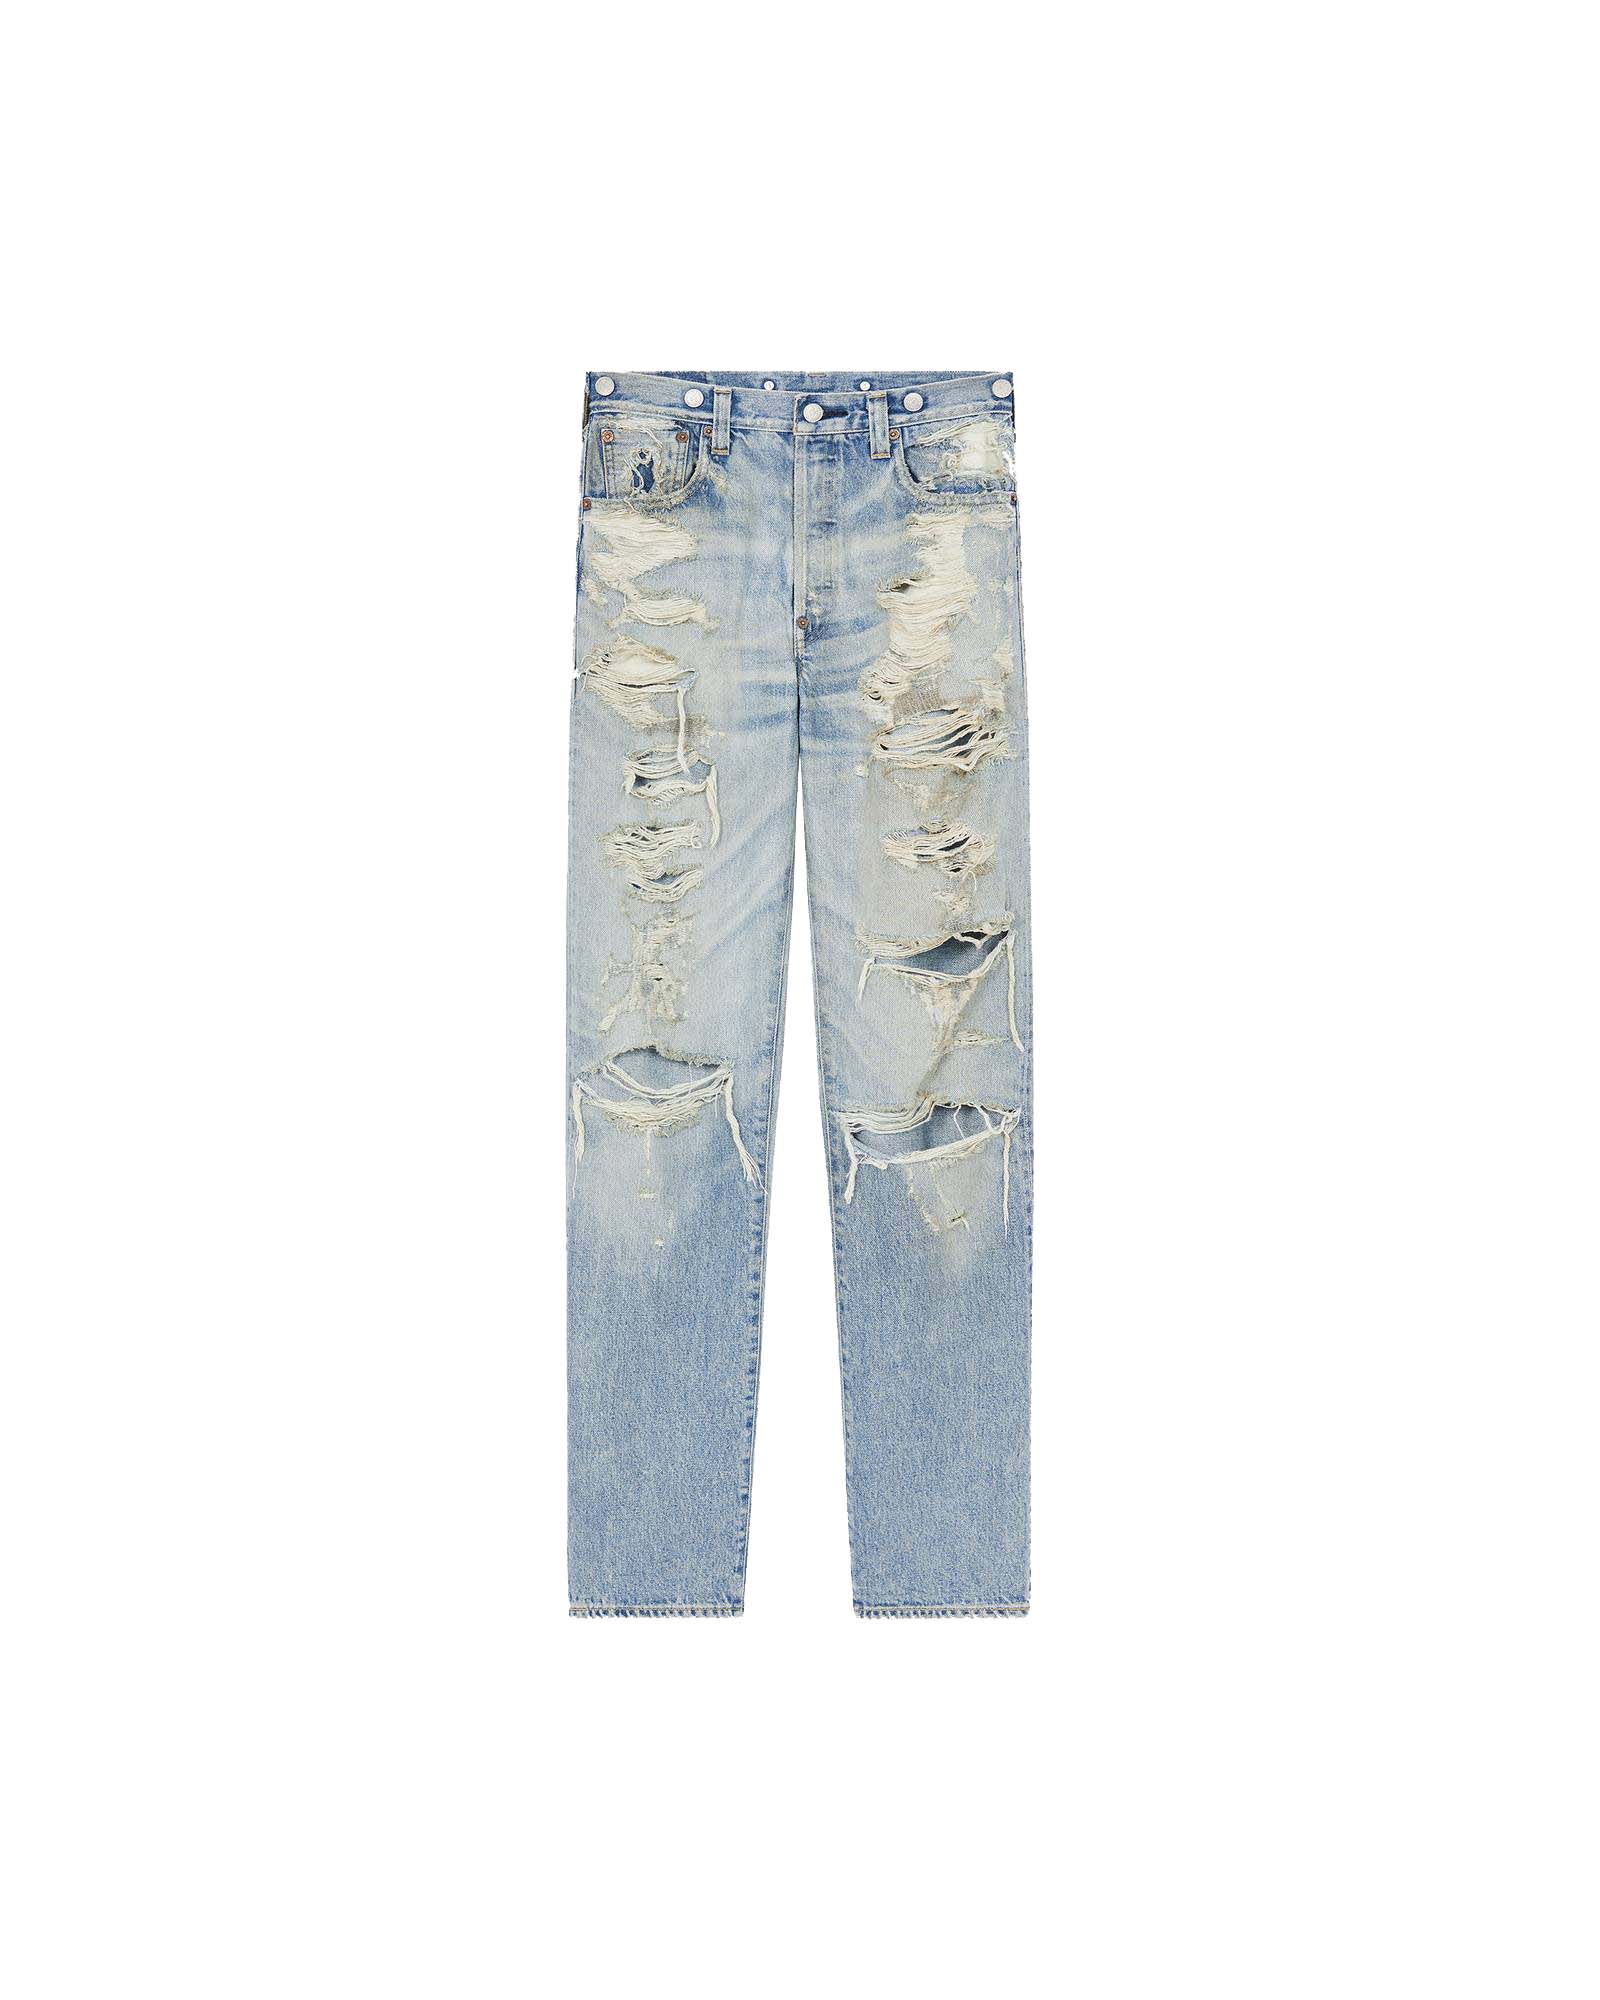 Stussy x Levi's Embossed 501 Jeans Stussy Rugged-Blue - SS23 - US